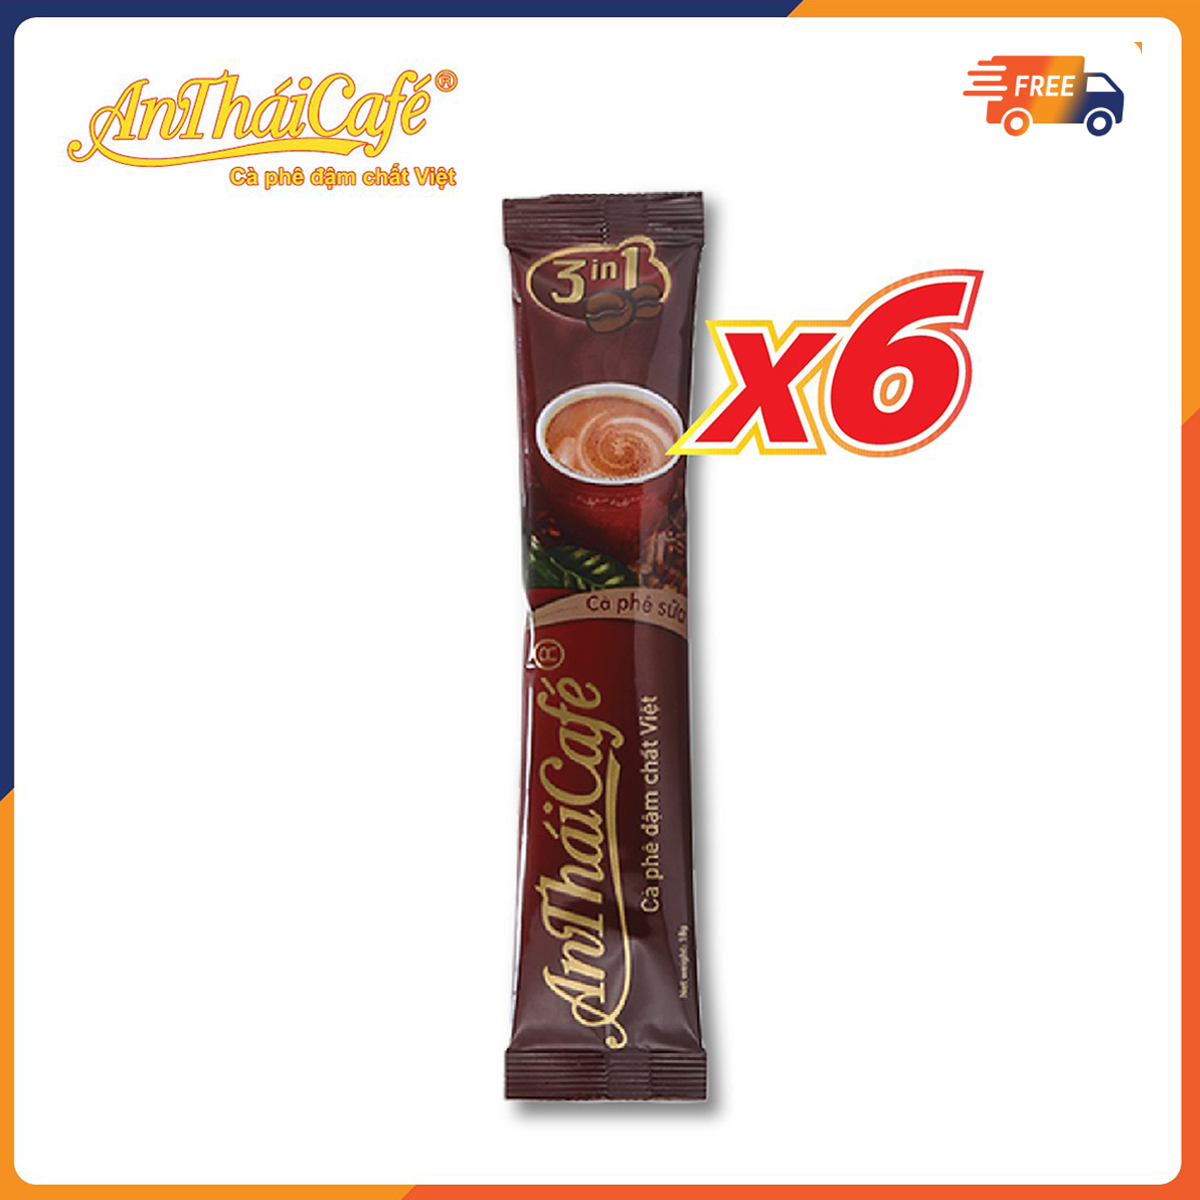 Combo 6 packs of 3in1 An Thai milk coffee